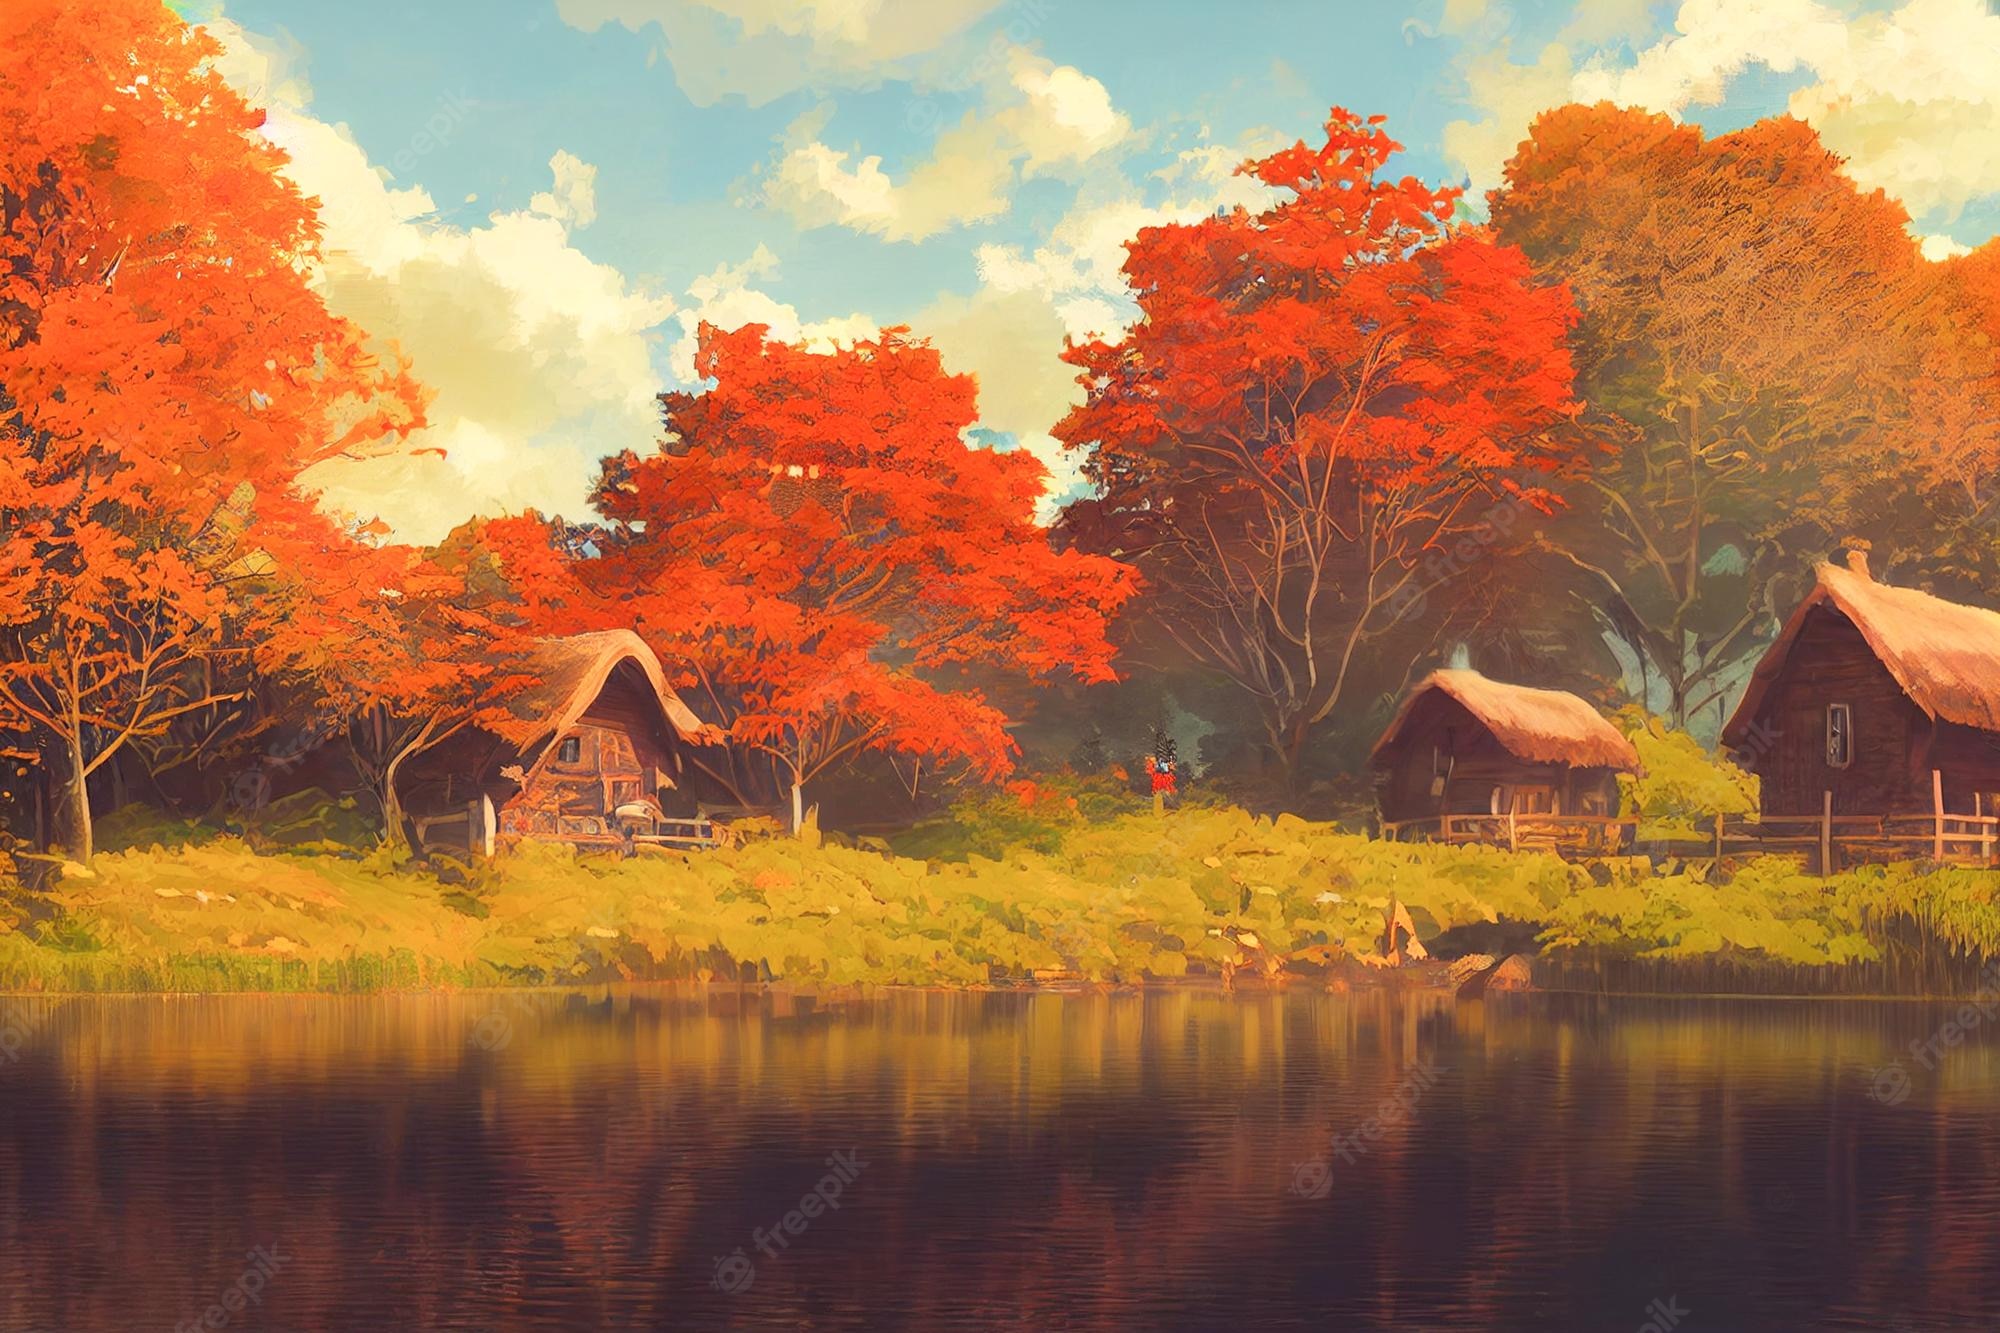 Premium Photod render digital painting of cabin near a river in the redwood forest